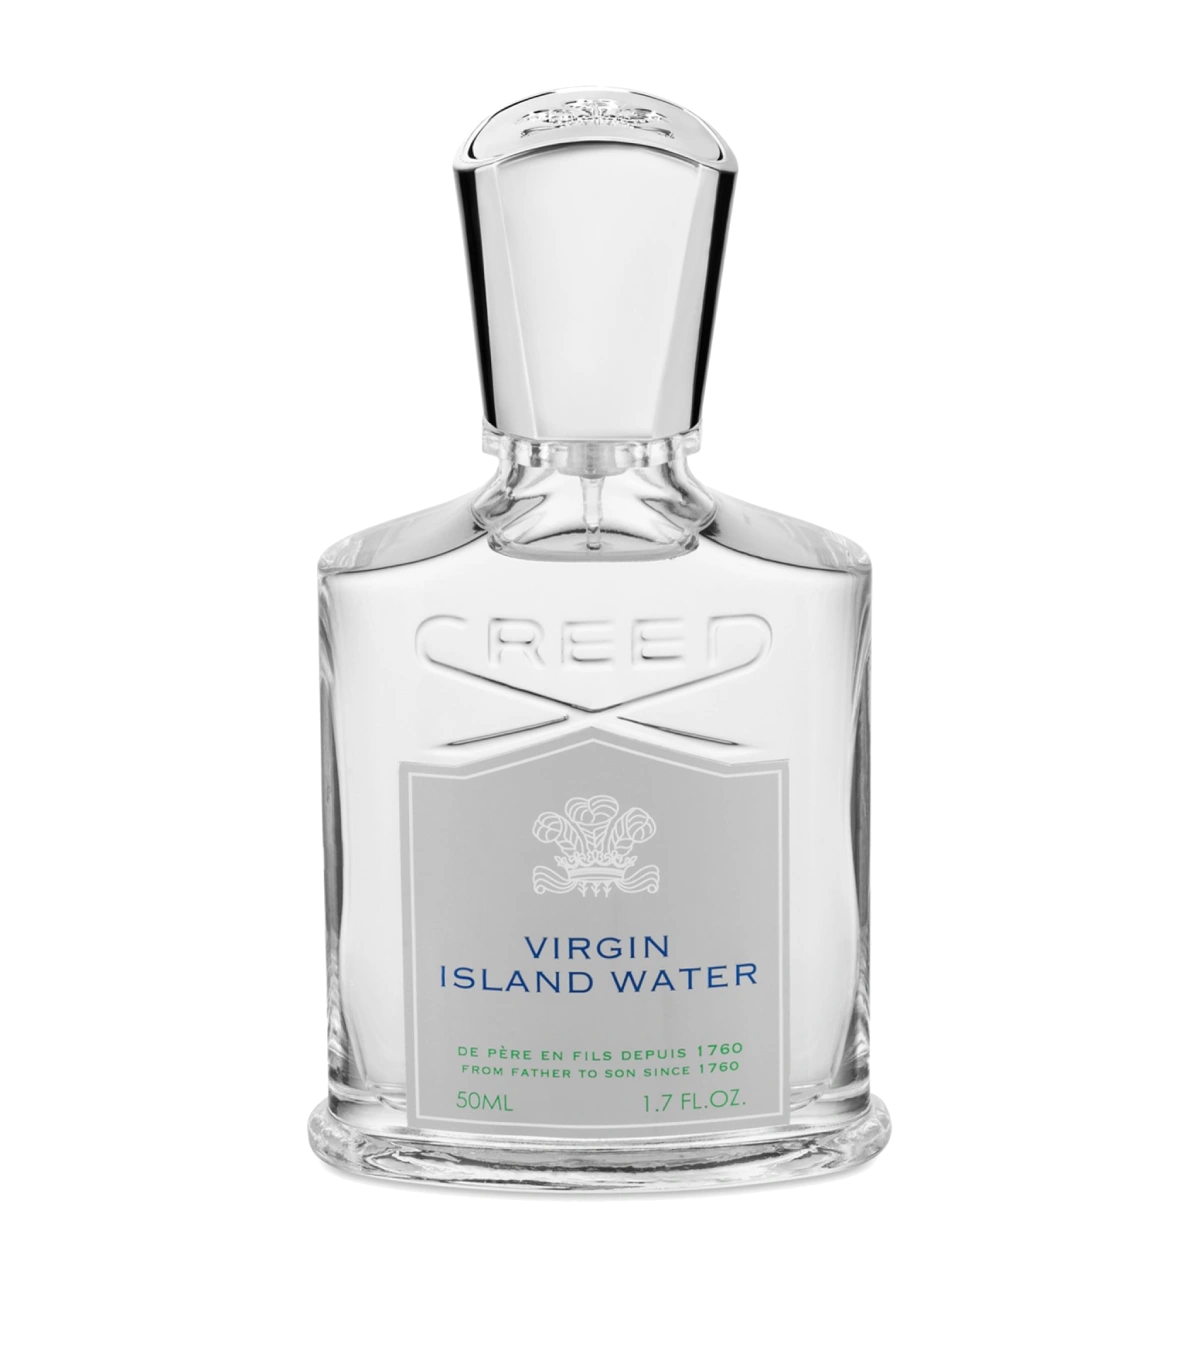 Bottle of Creed's Virgin Island Water perfume against a tropical backdrop